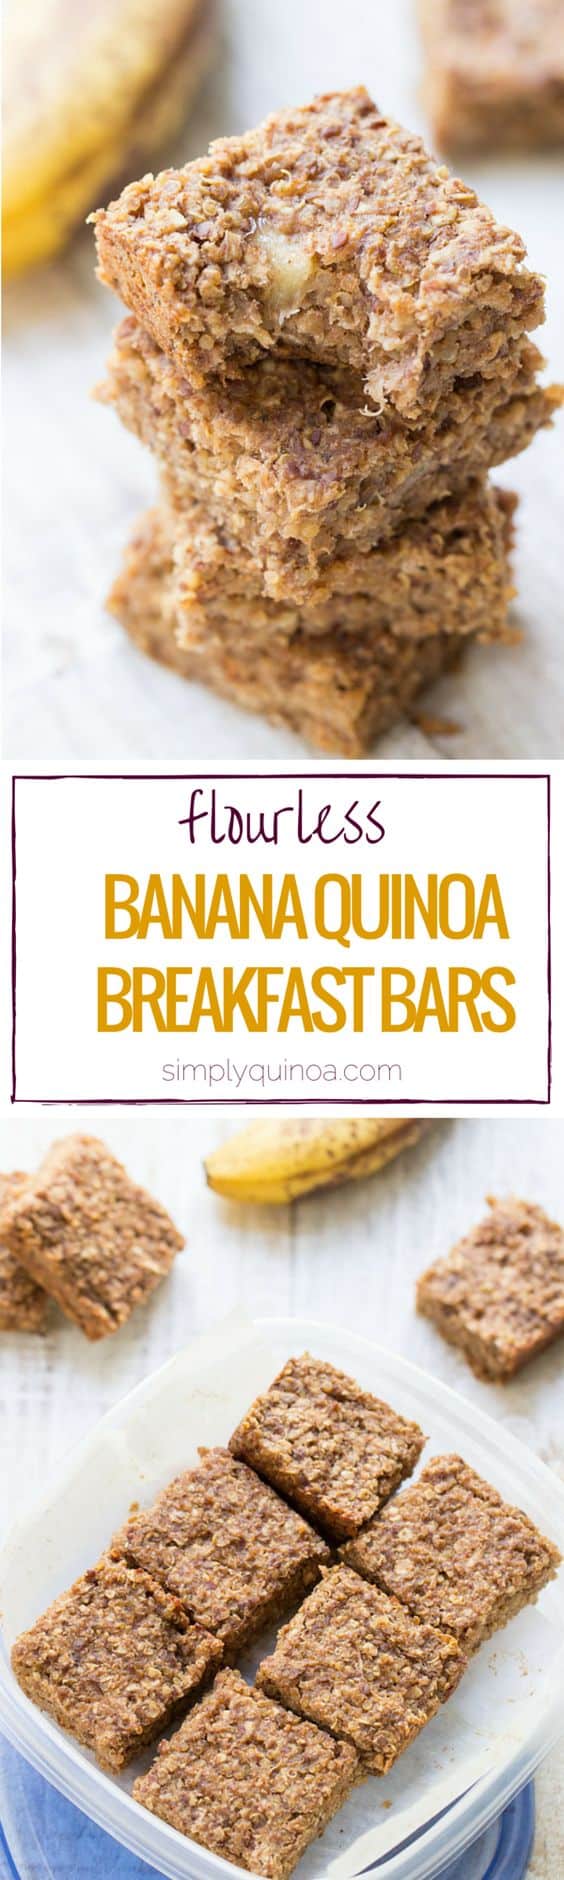 Flourless Banana + Quinoa Breakfast Bars // These are HEALTHY + DELICIOUS! Plus, they're made without gluten, refined sugar and eggs!